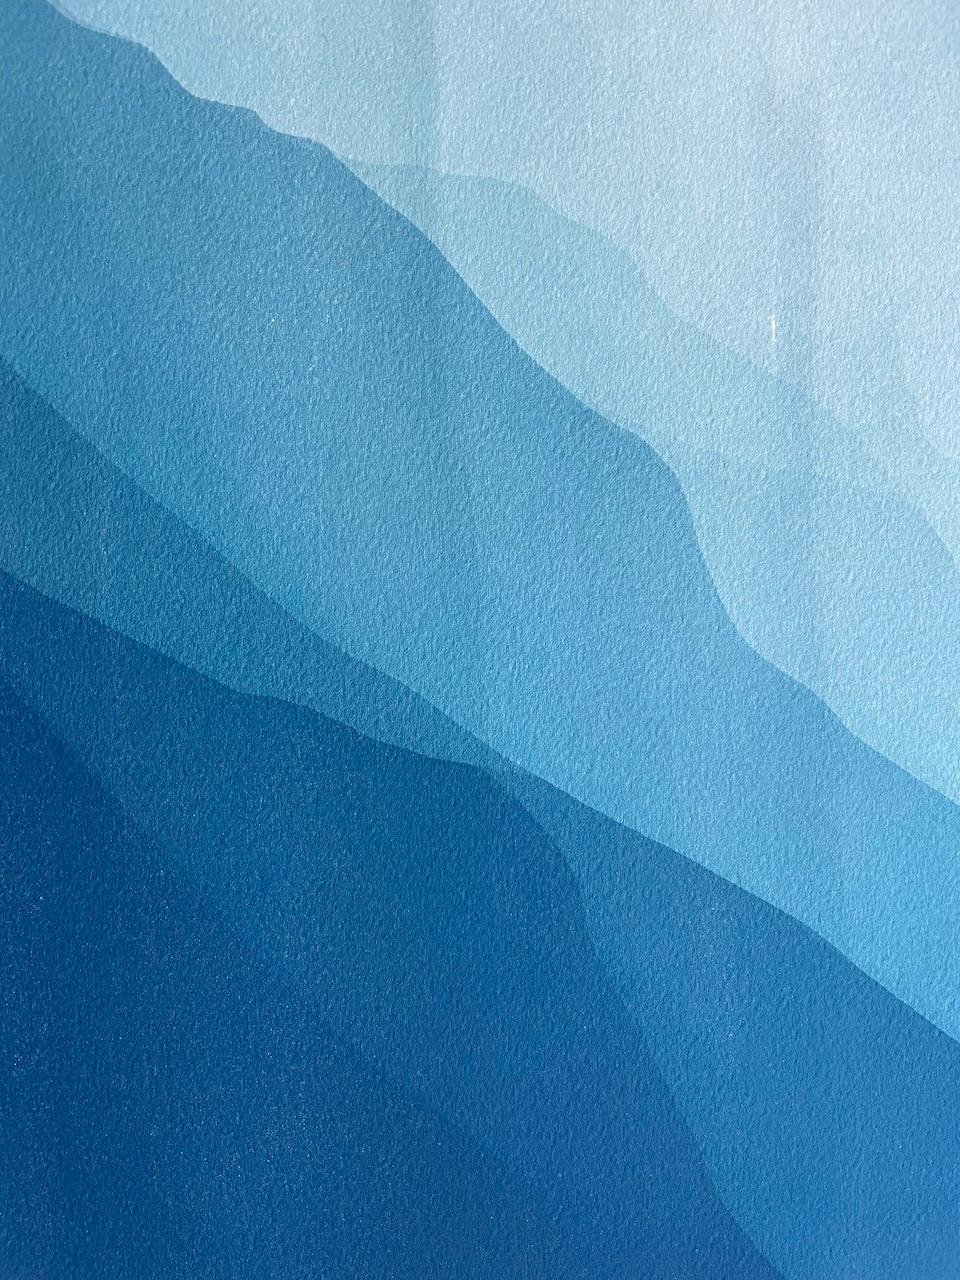 Sea Cliffs 6 (Hand-printed 40 x 20 inch abstract cyanotype) - Photograph by Christine So